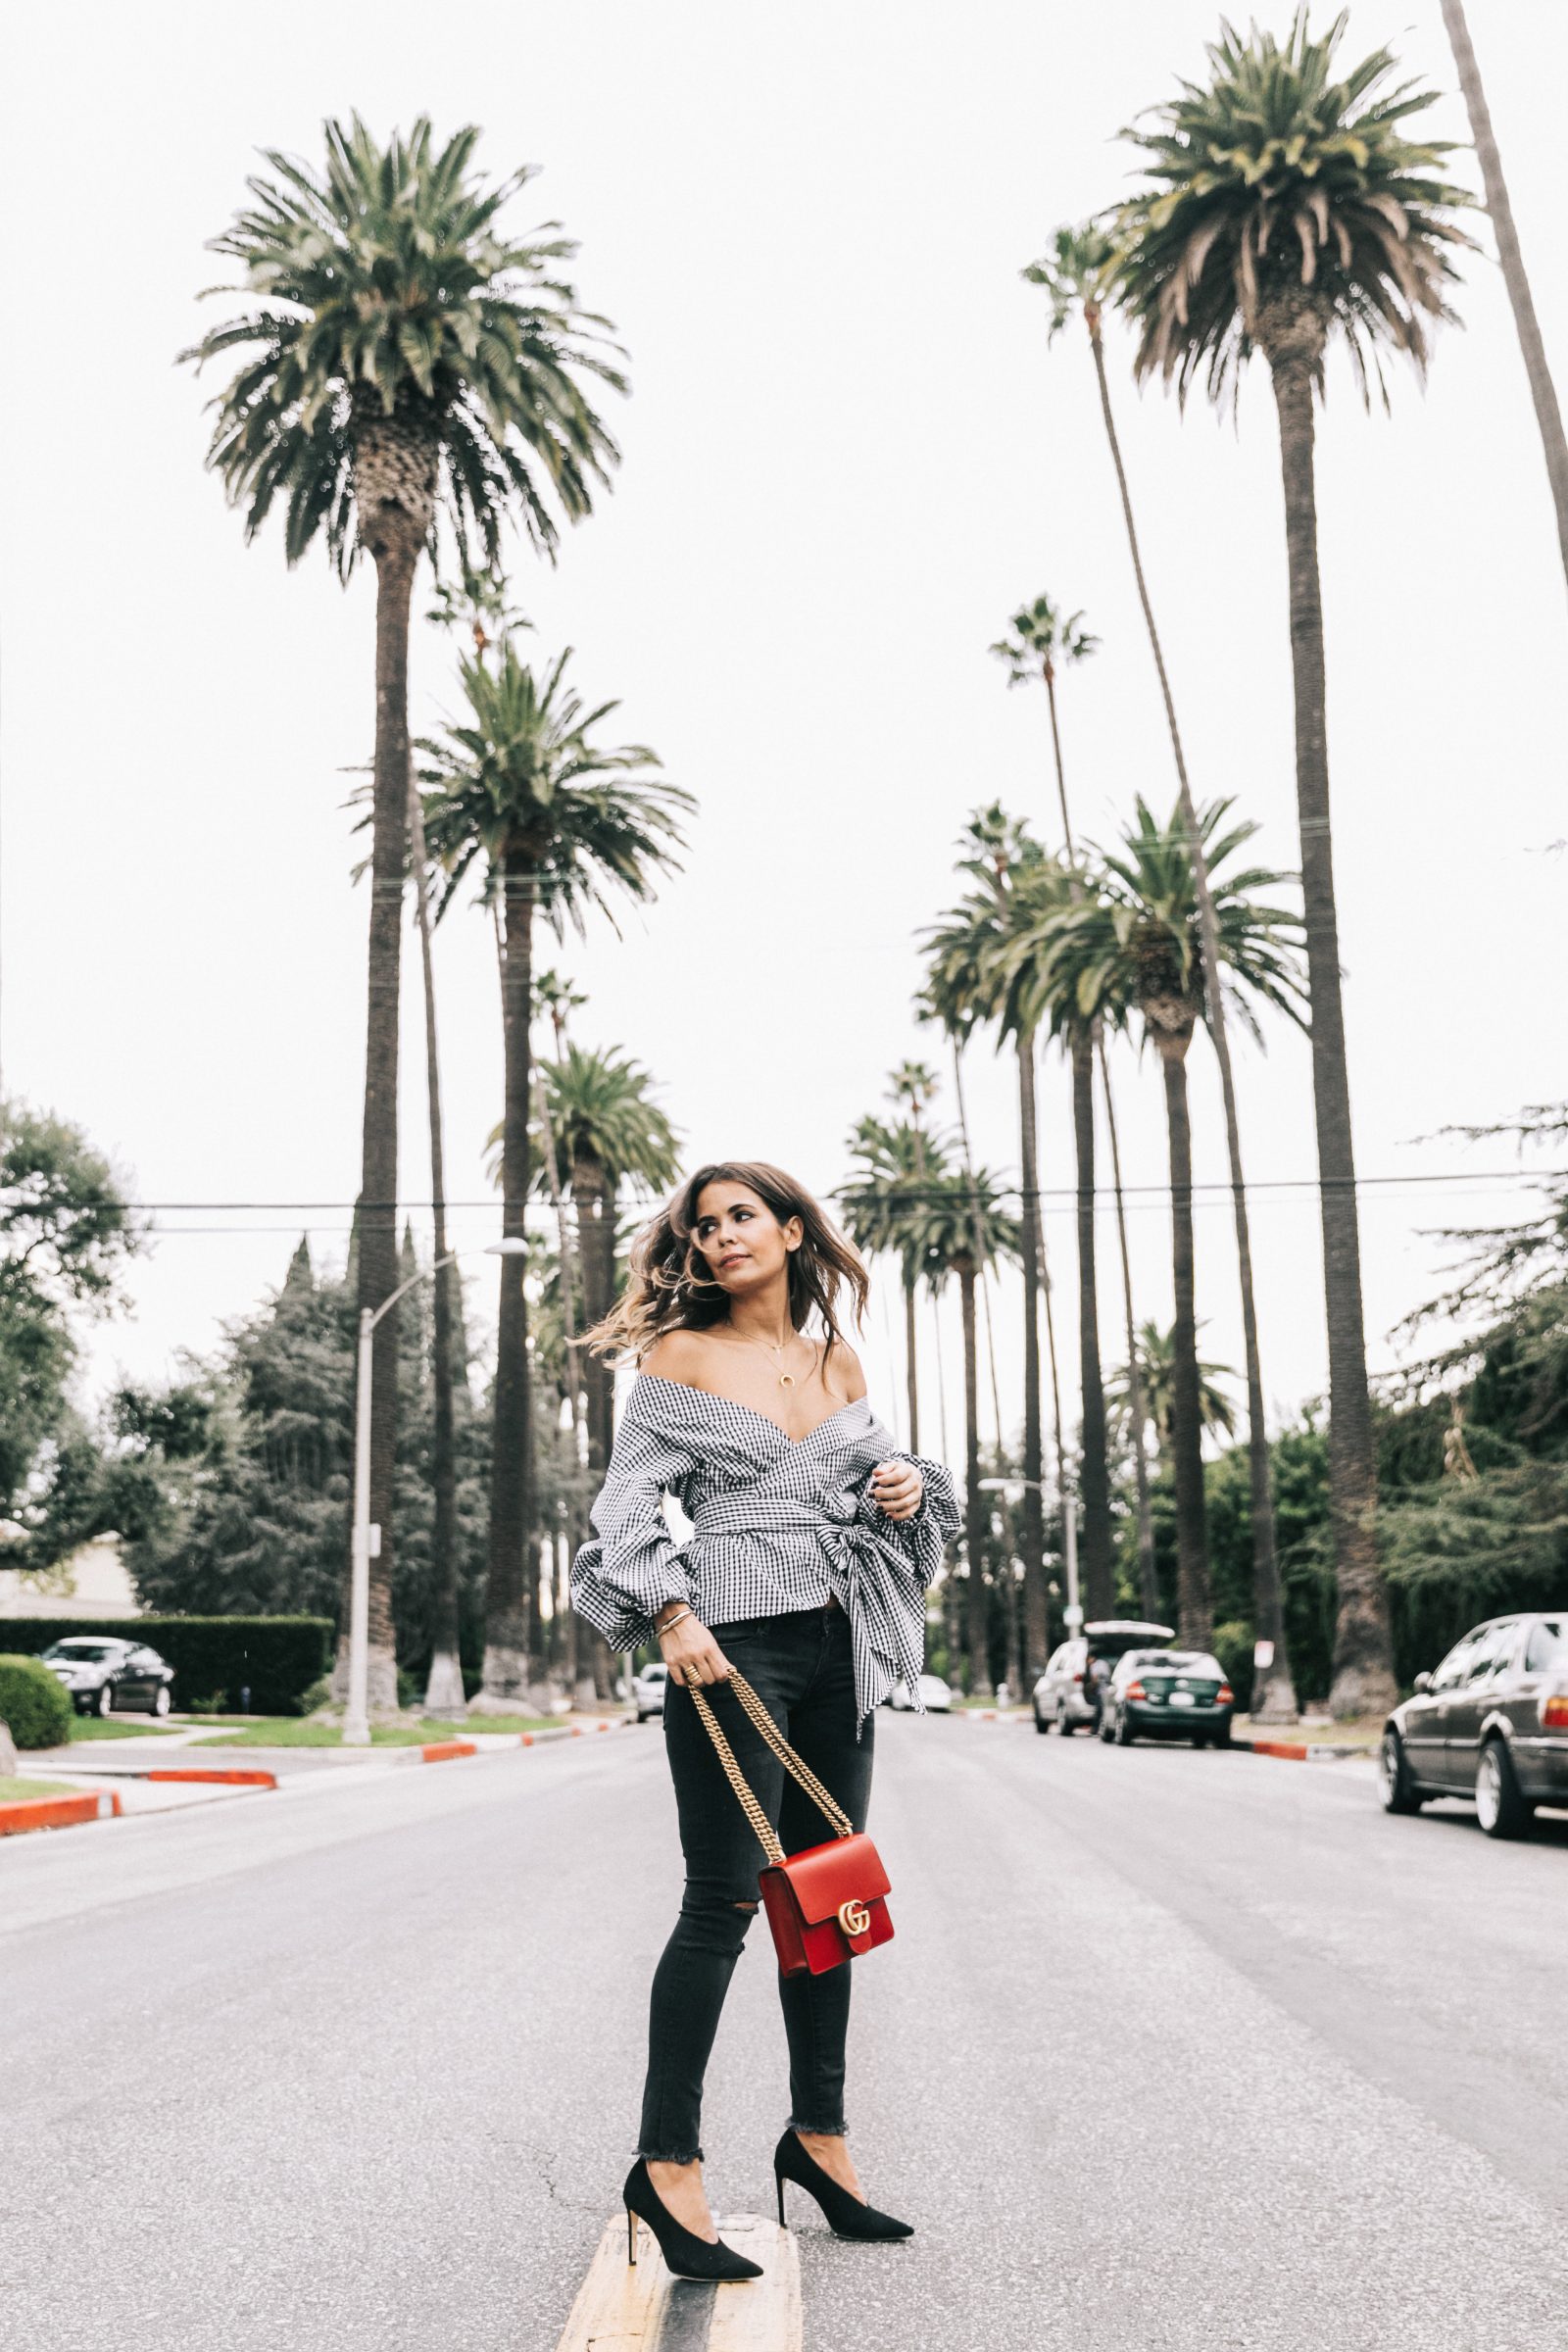 beverly_hills-off_the_shoulders_shirt-plaid-skinny_jeans-ripped_jeans-sincerely_jules_shop-gucci_bag-chicwish-outfit-street_style-los_angeles-collage_vintage-12